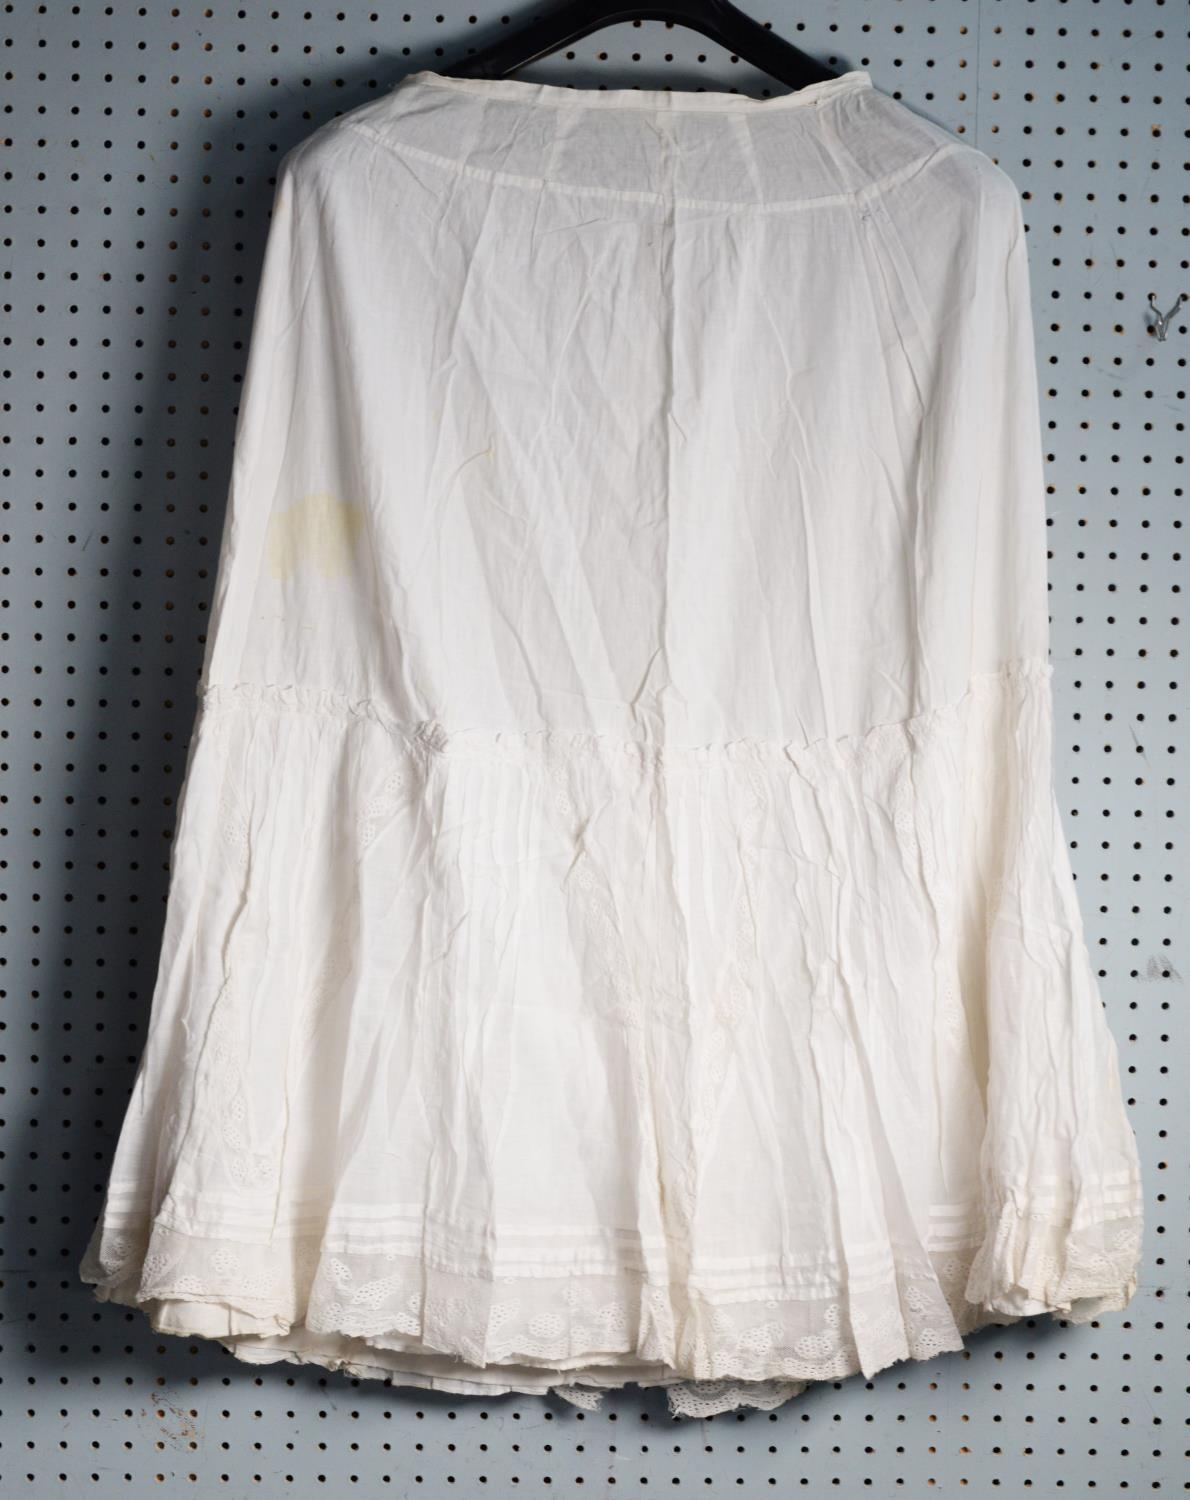 EARLY VICTORIAN WHITE LACE UNDERSKIRT, the lower portion double layered, white floral embroidered